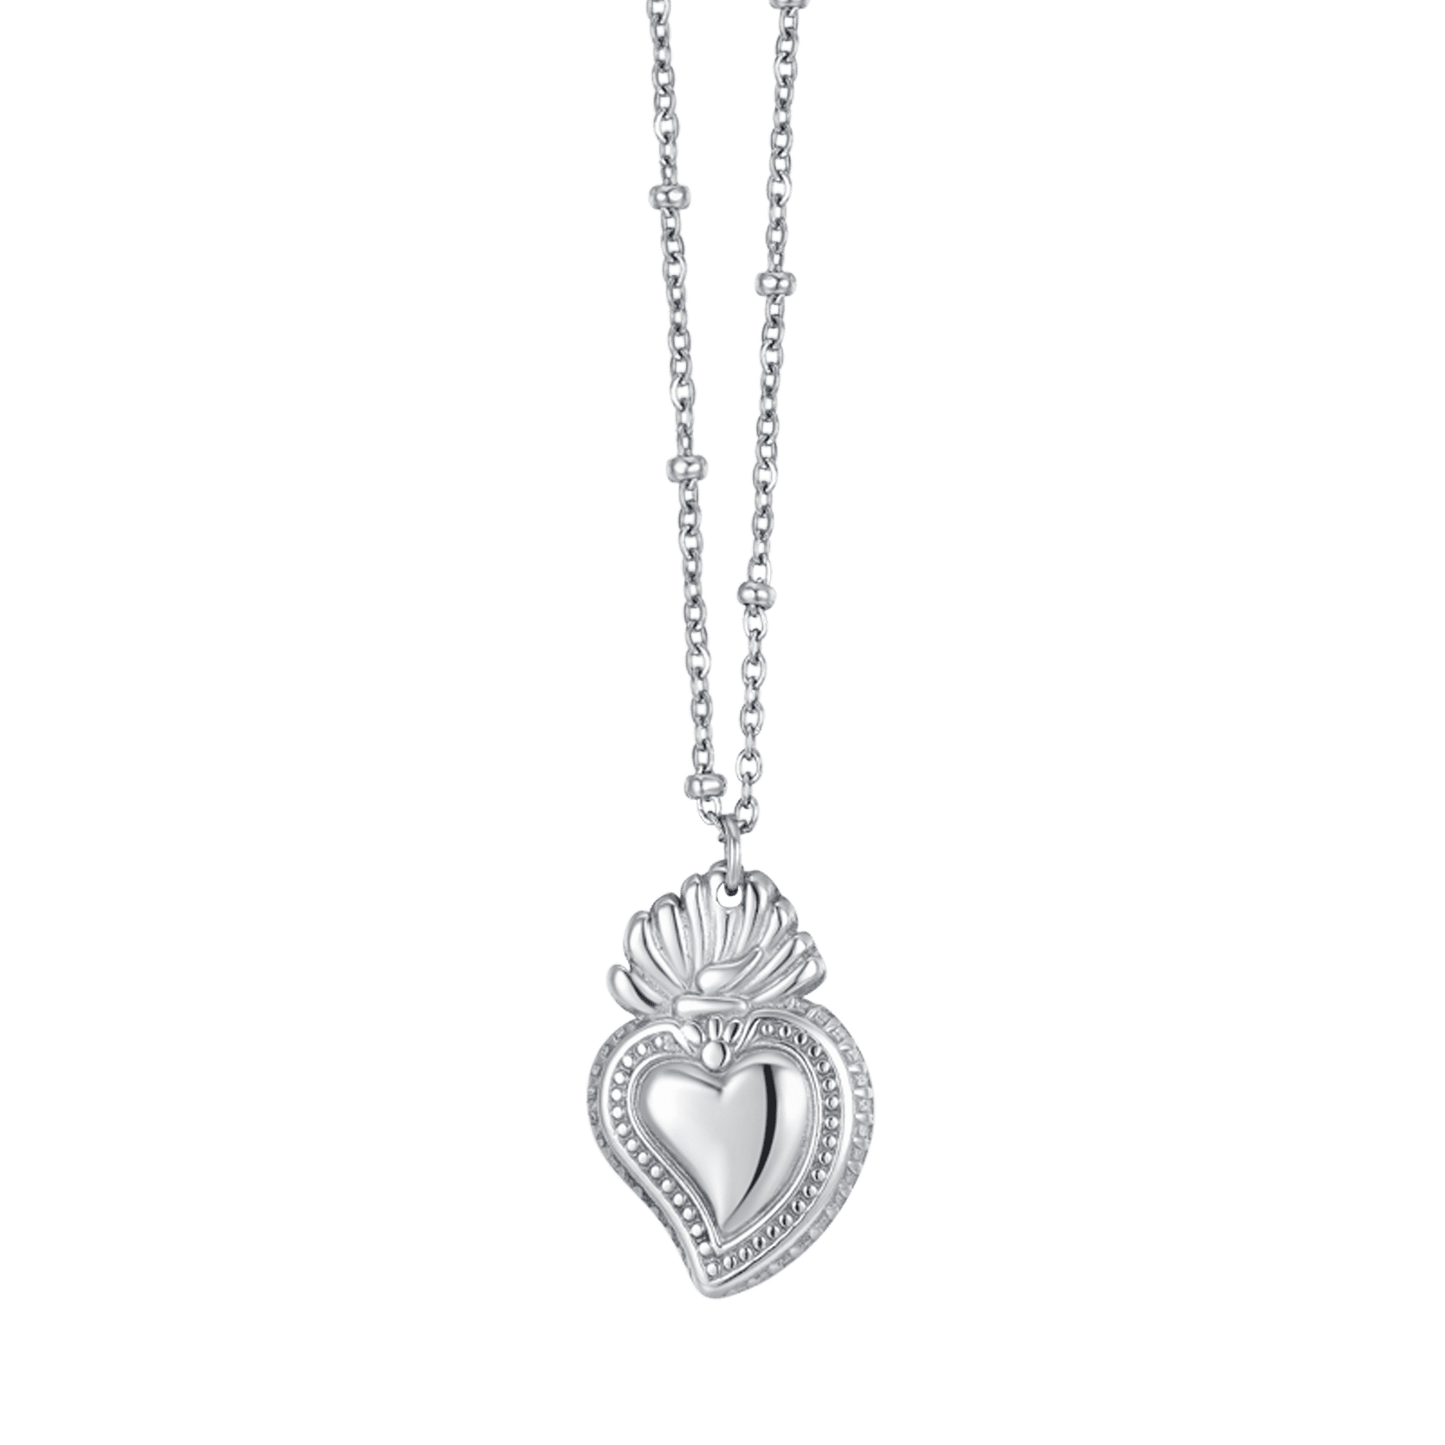 WOMAN STEEL NECKLACE WITH SACRED HEART